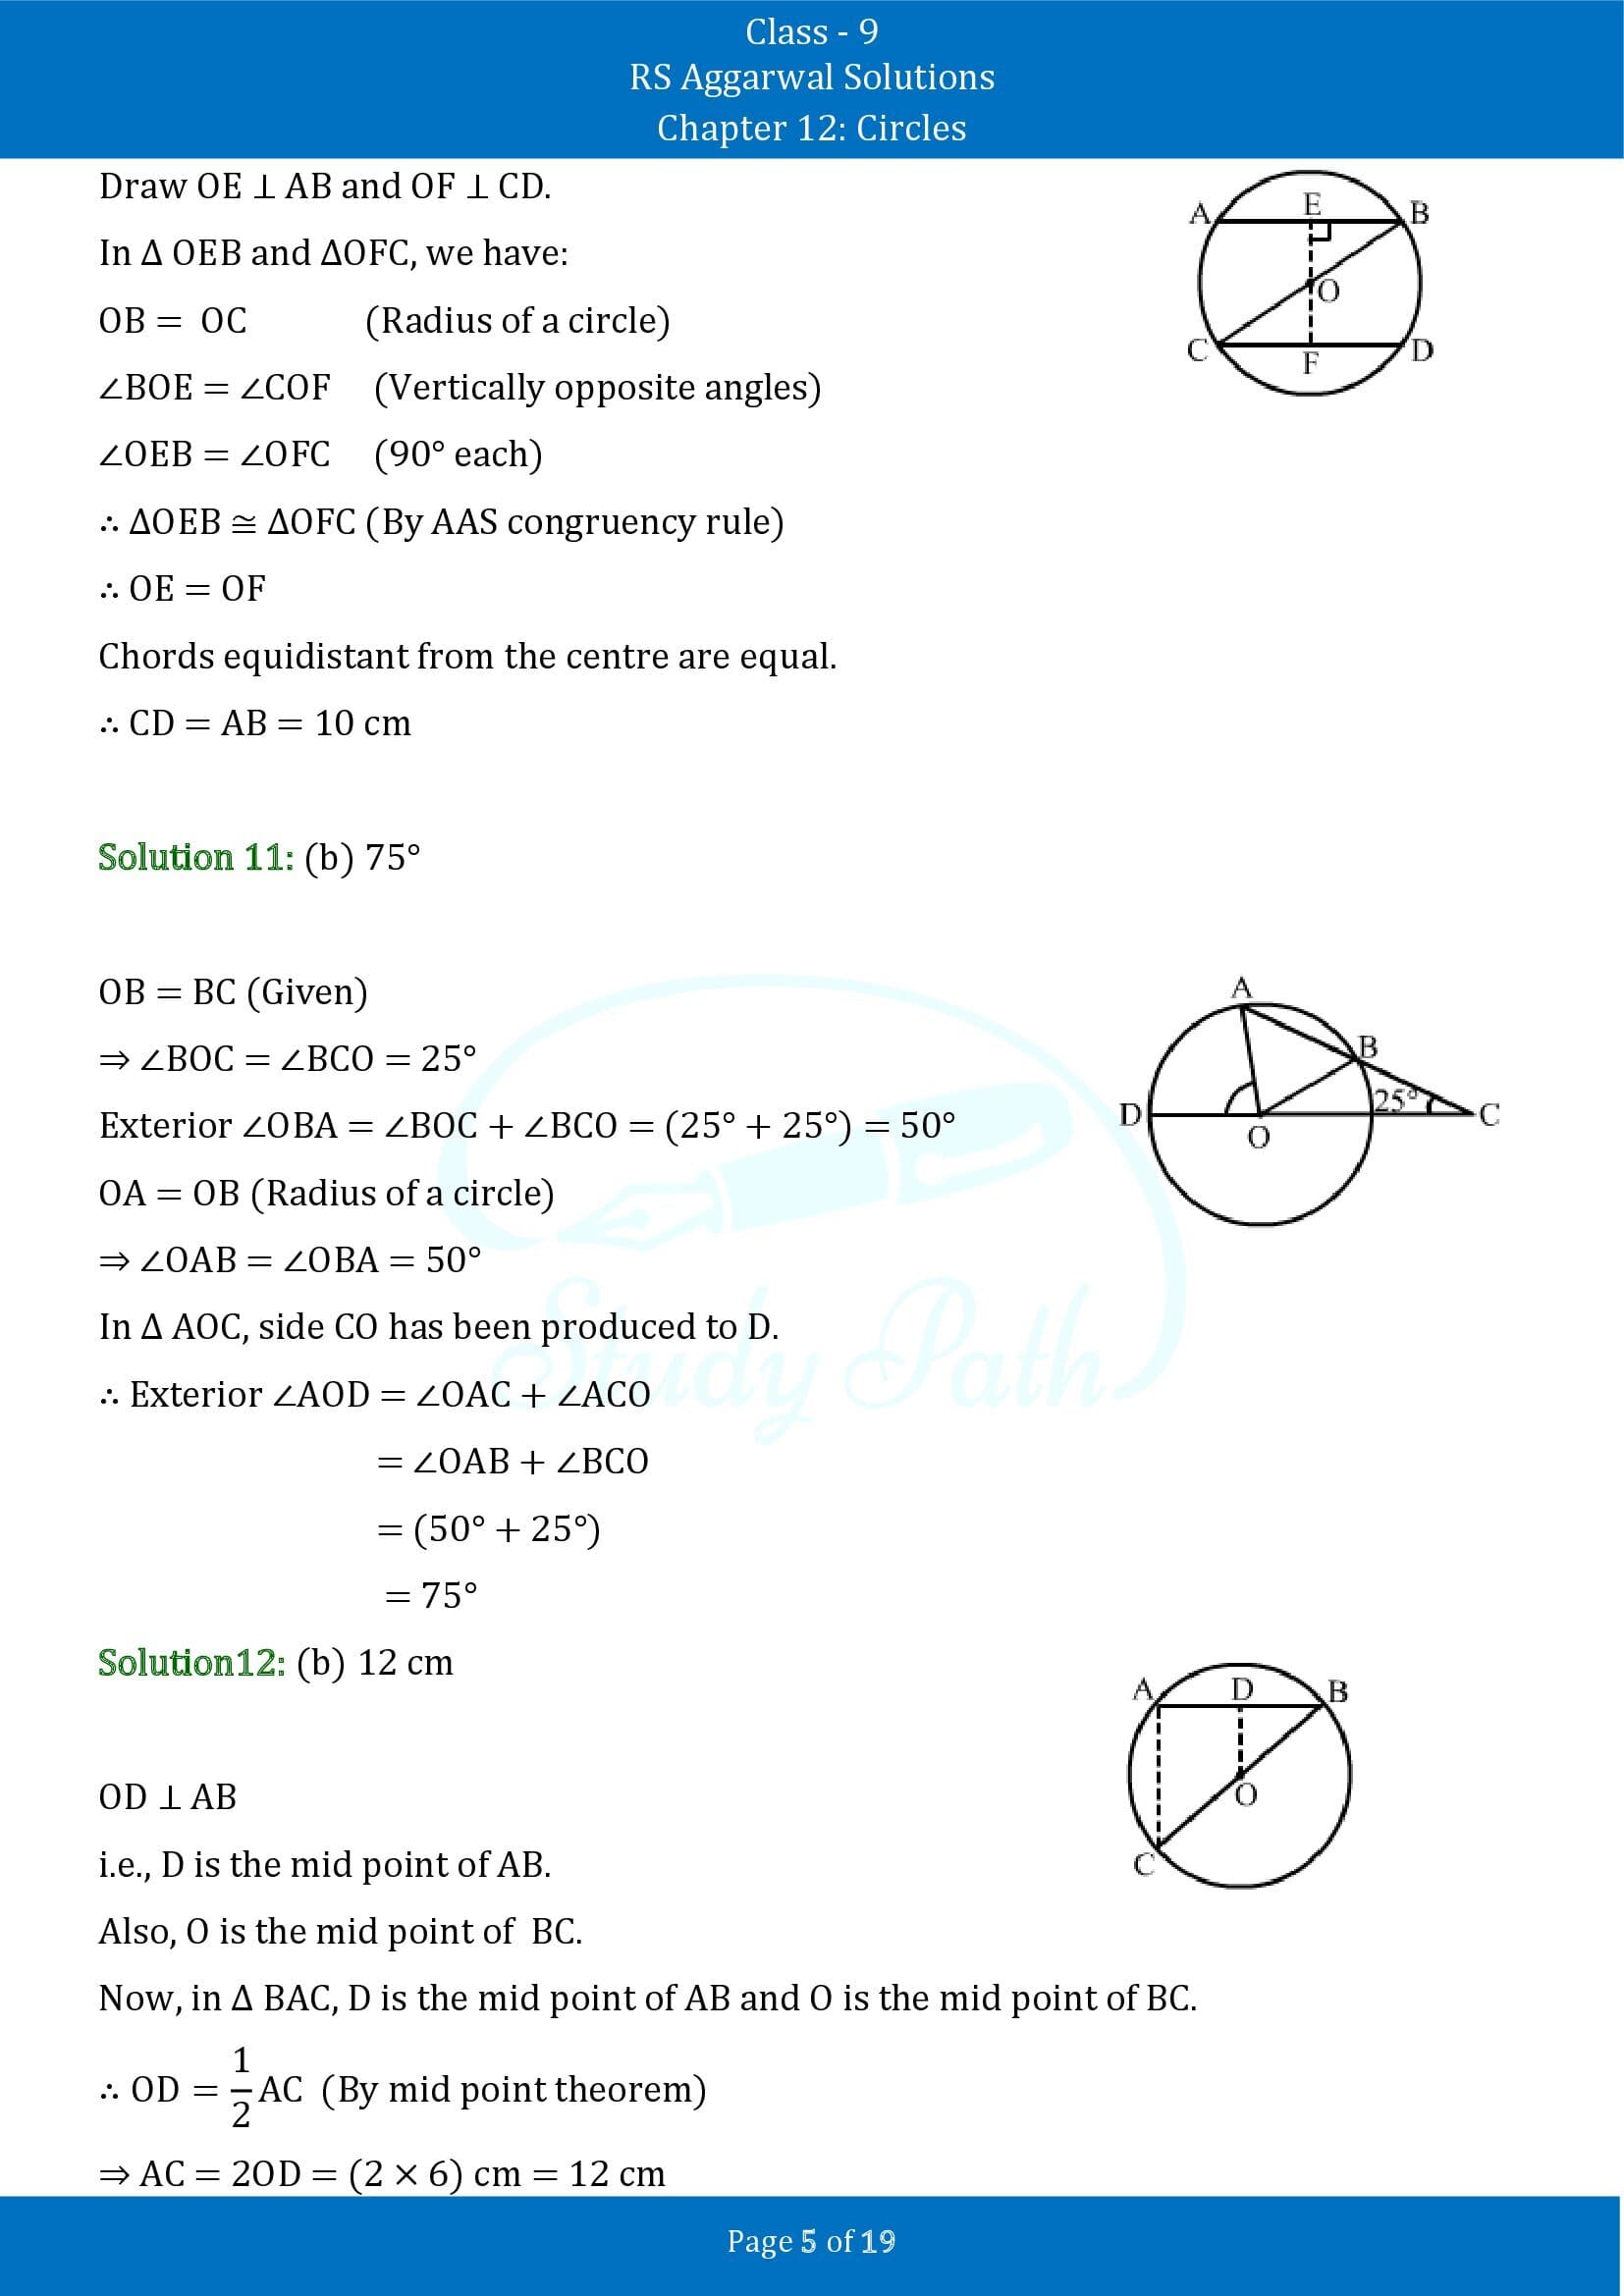 RS Aggarwal Solutions Class 9 Chapter 12 Circles Multiple Choice Questions MCQs 00005